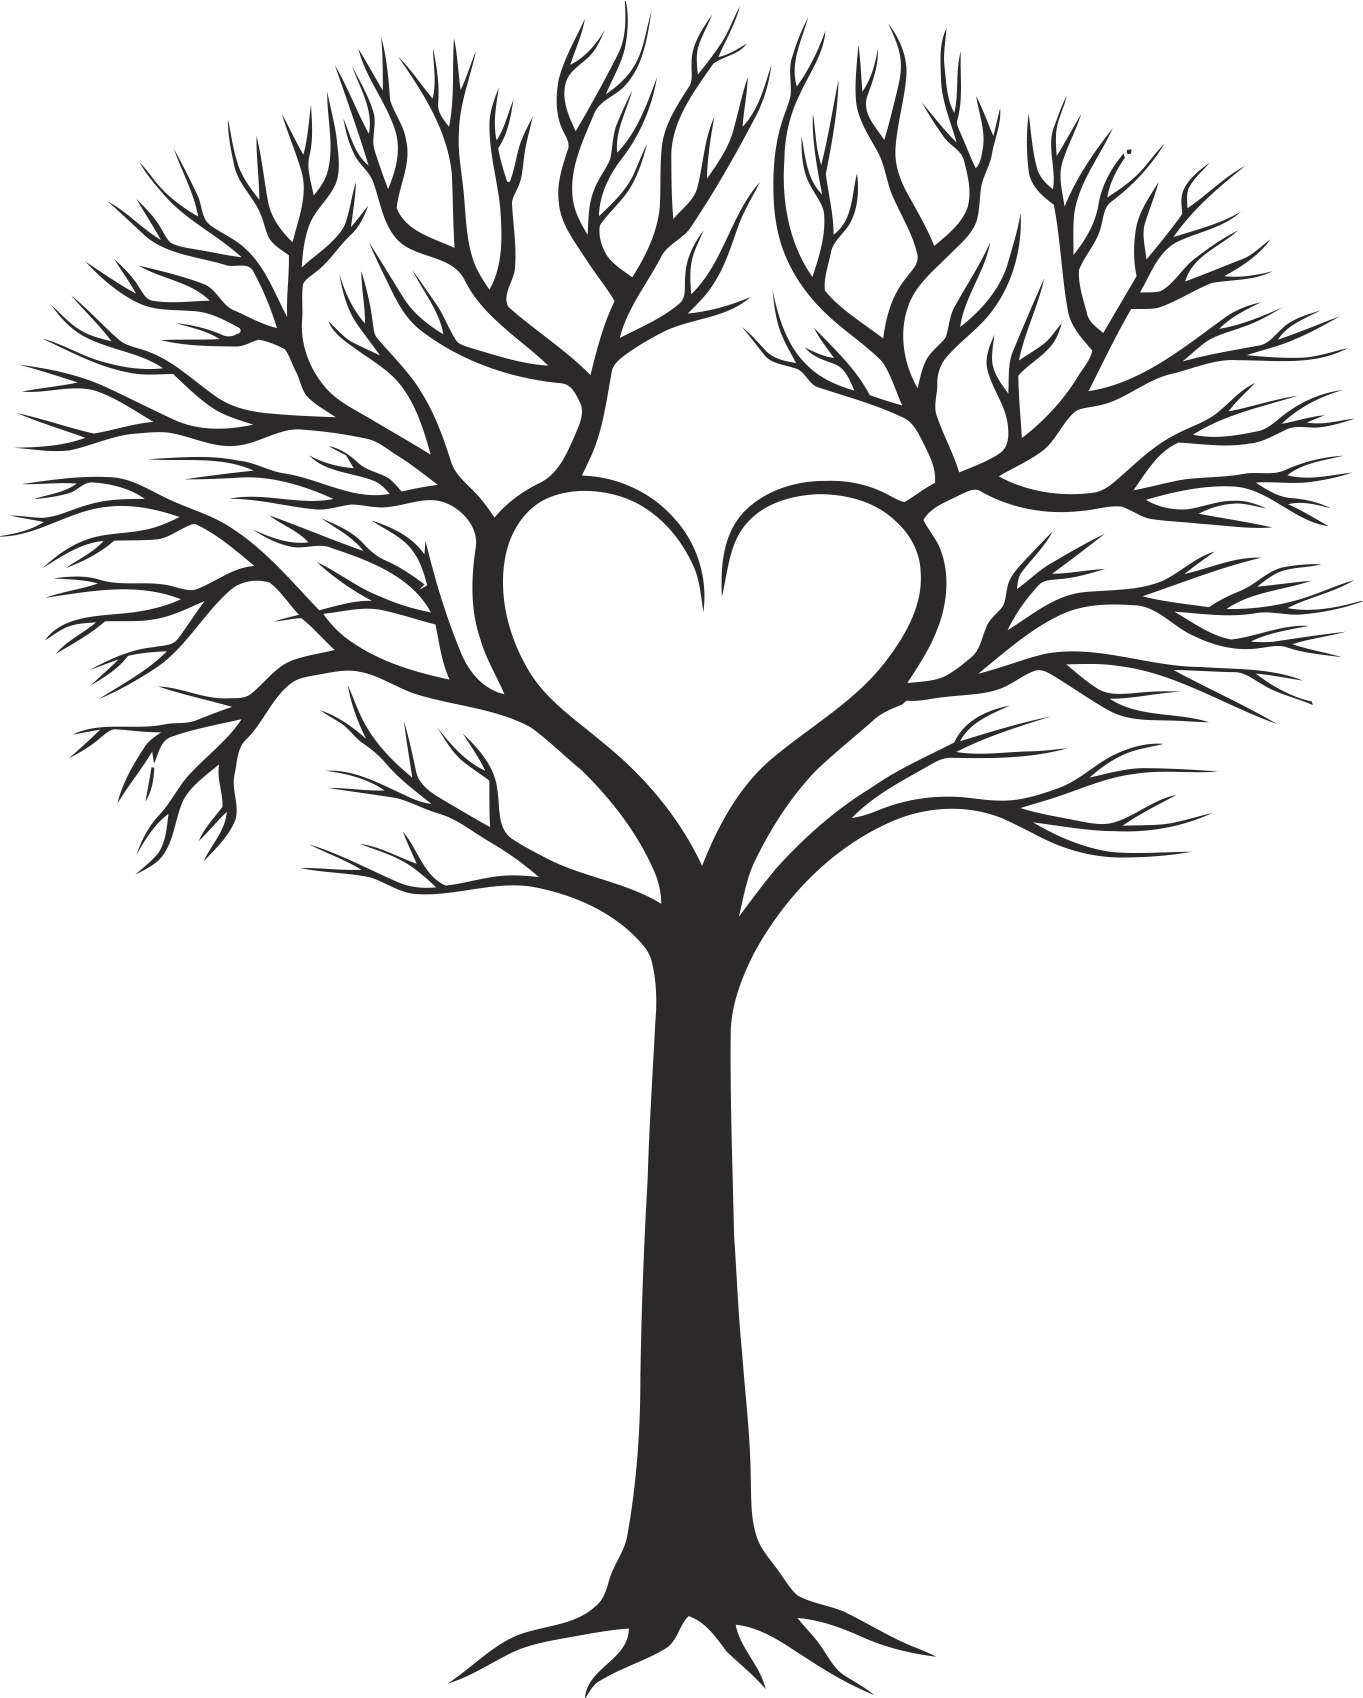 Download Family Tree Silhouette Vector at Vectorified.com ...